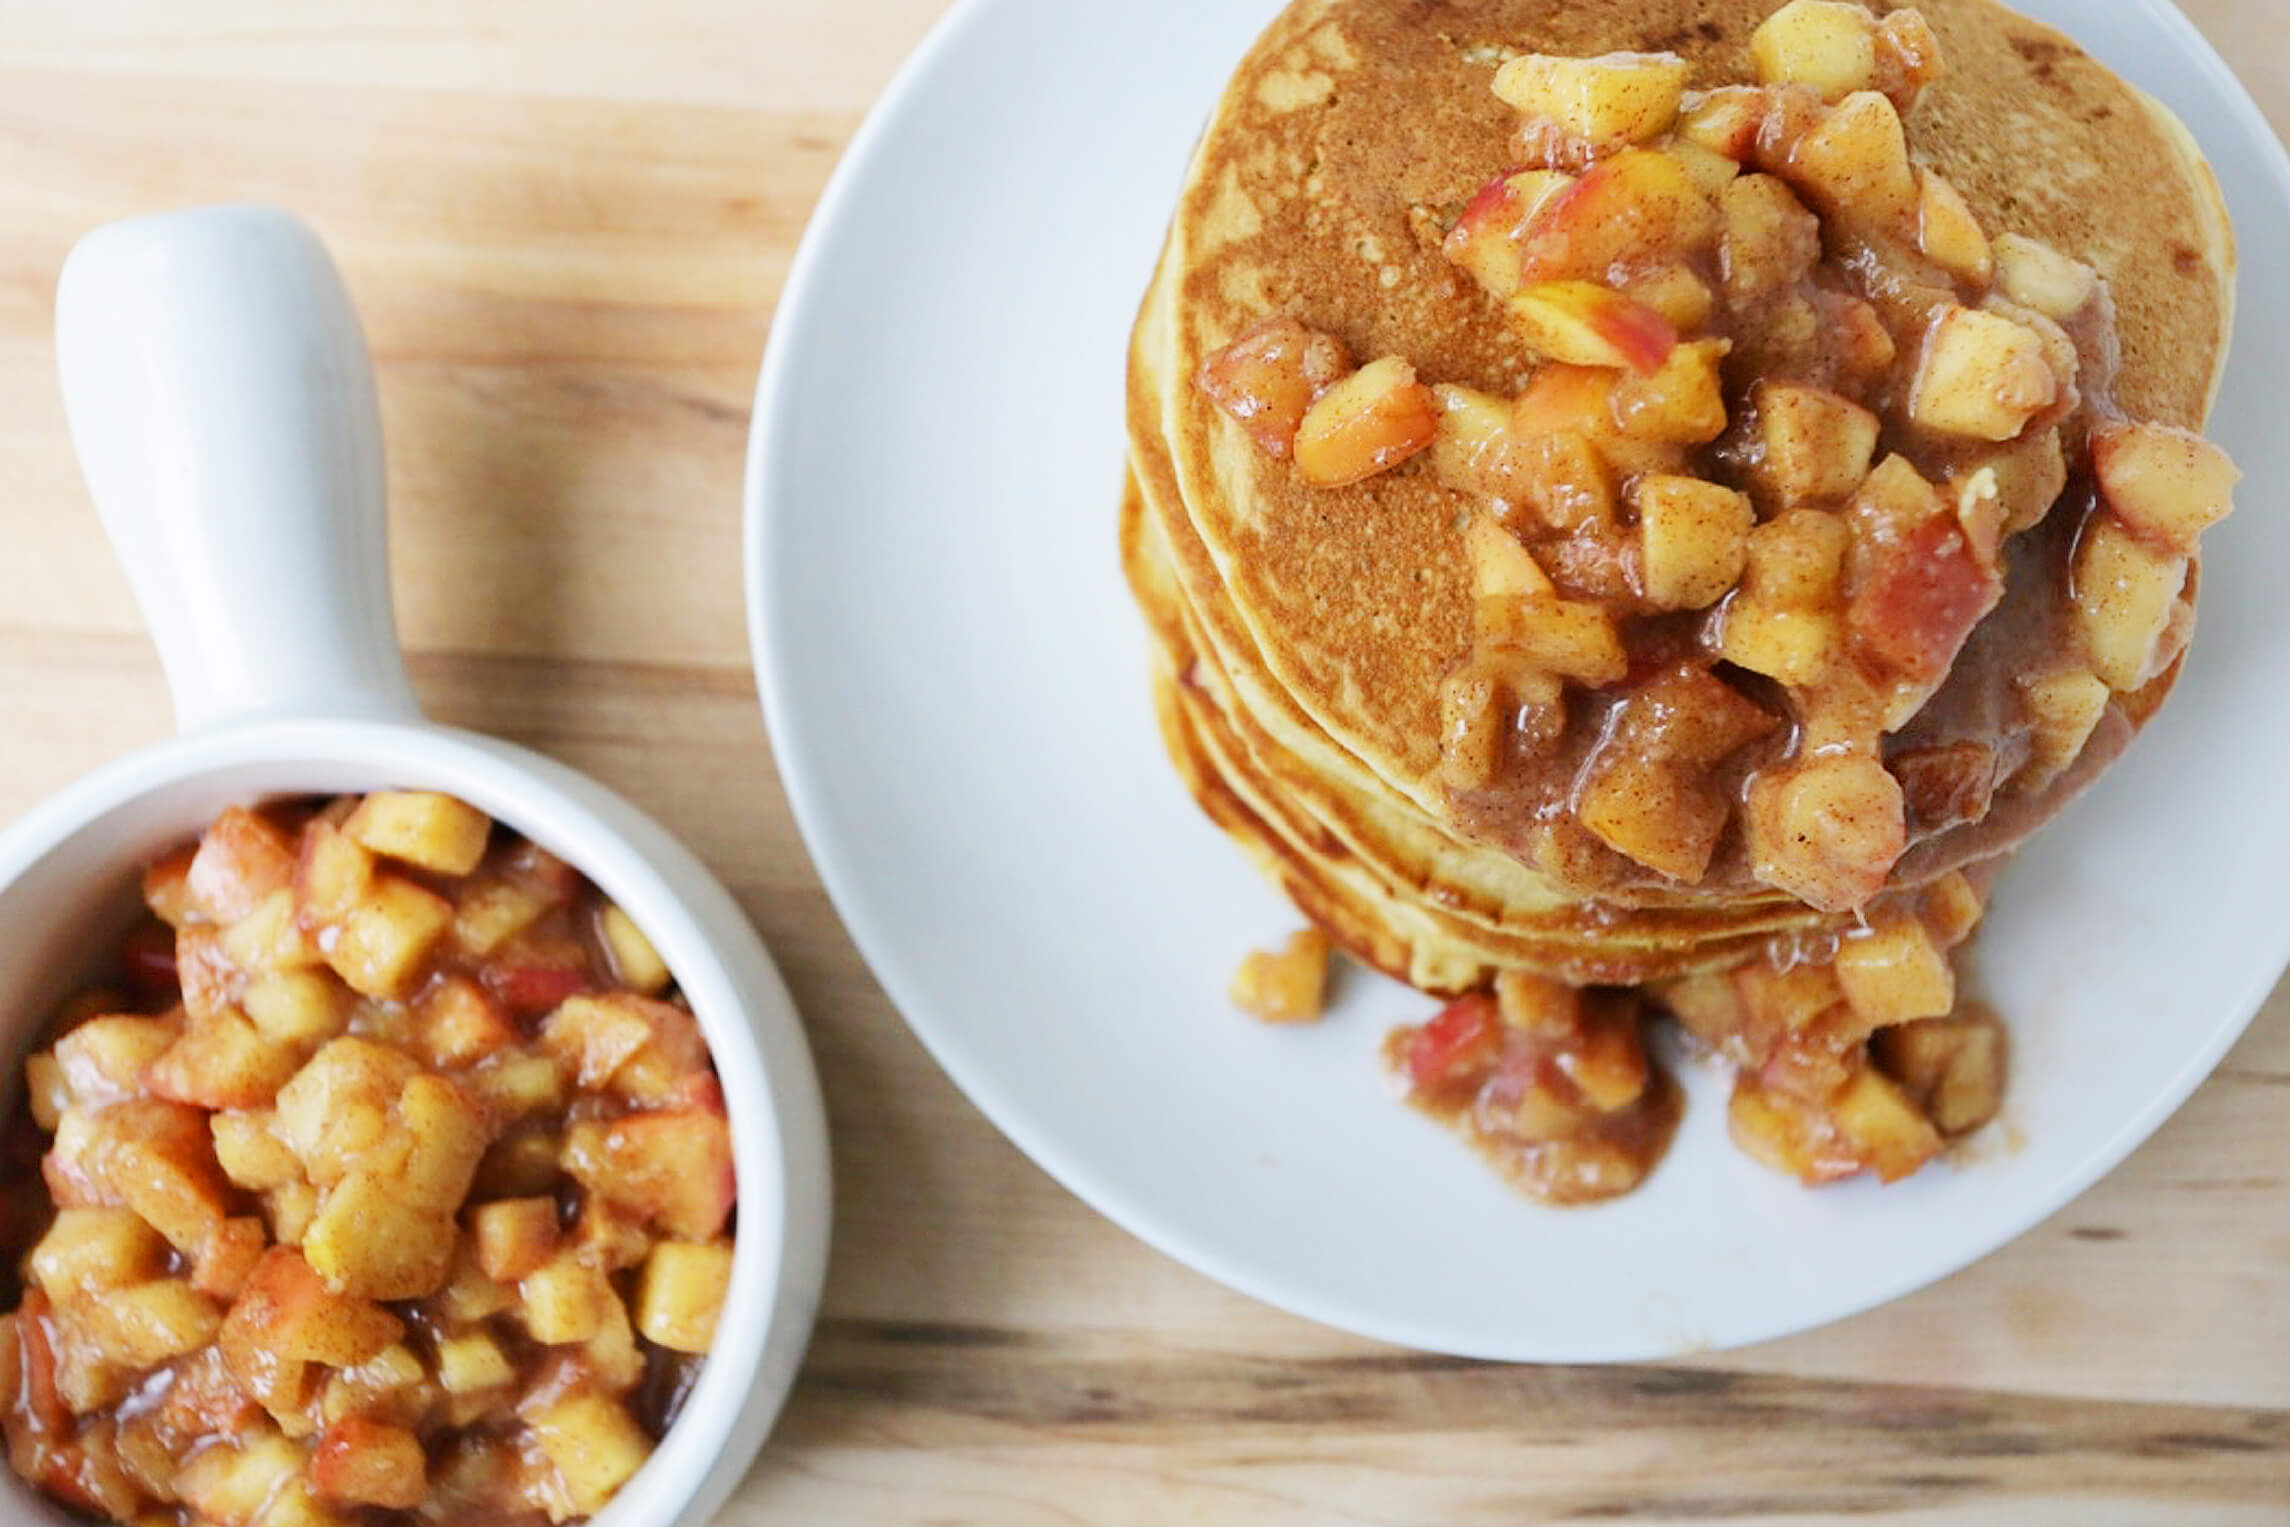 20 Healthy Fall & Thanksgiving Meal Ideas Your Clients Will Love: Apple Pie Pancakes